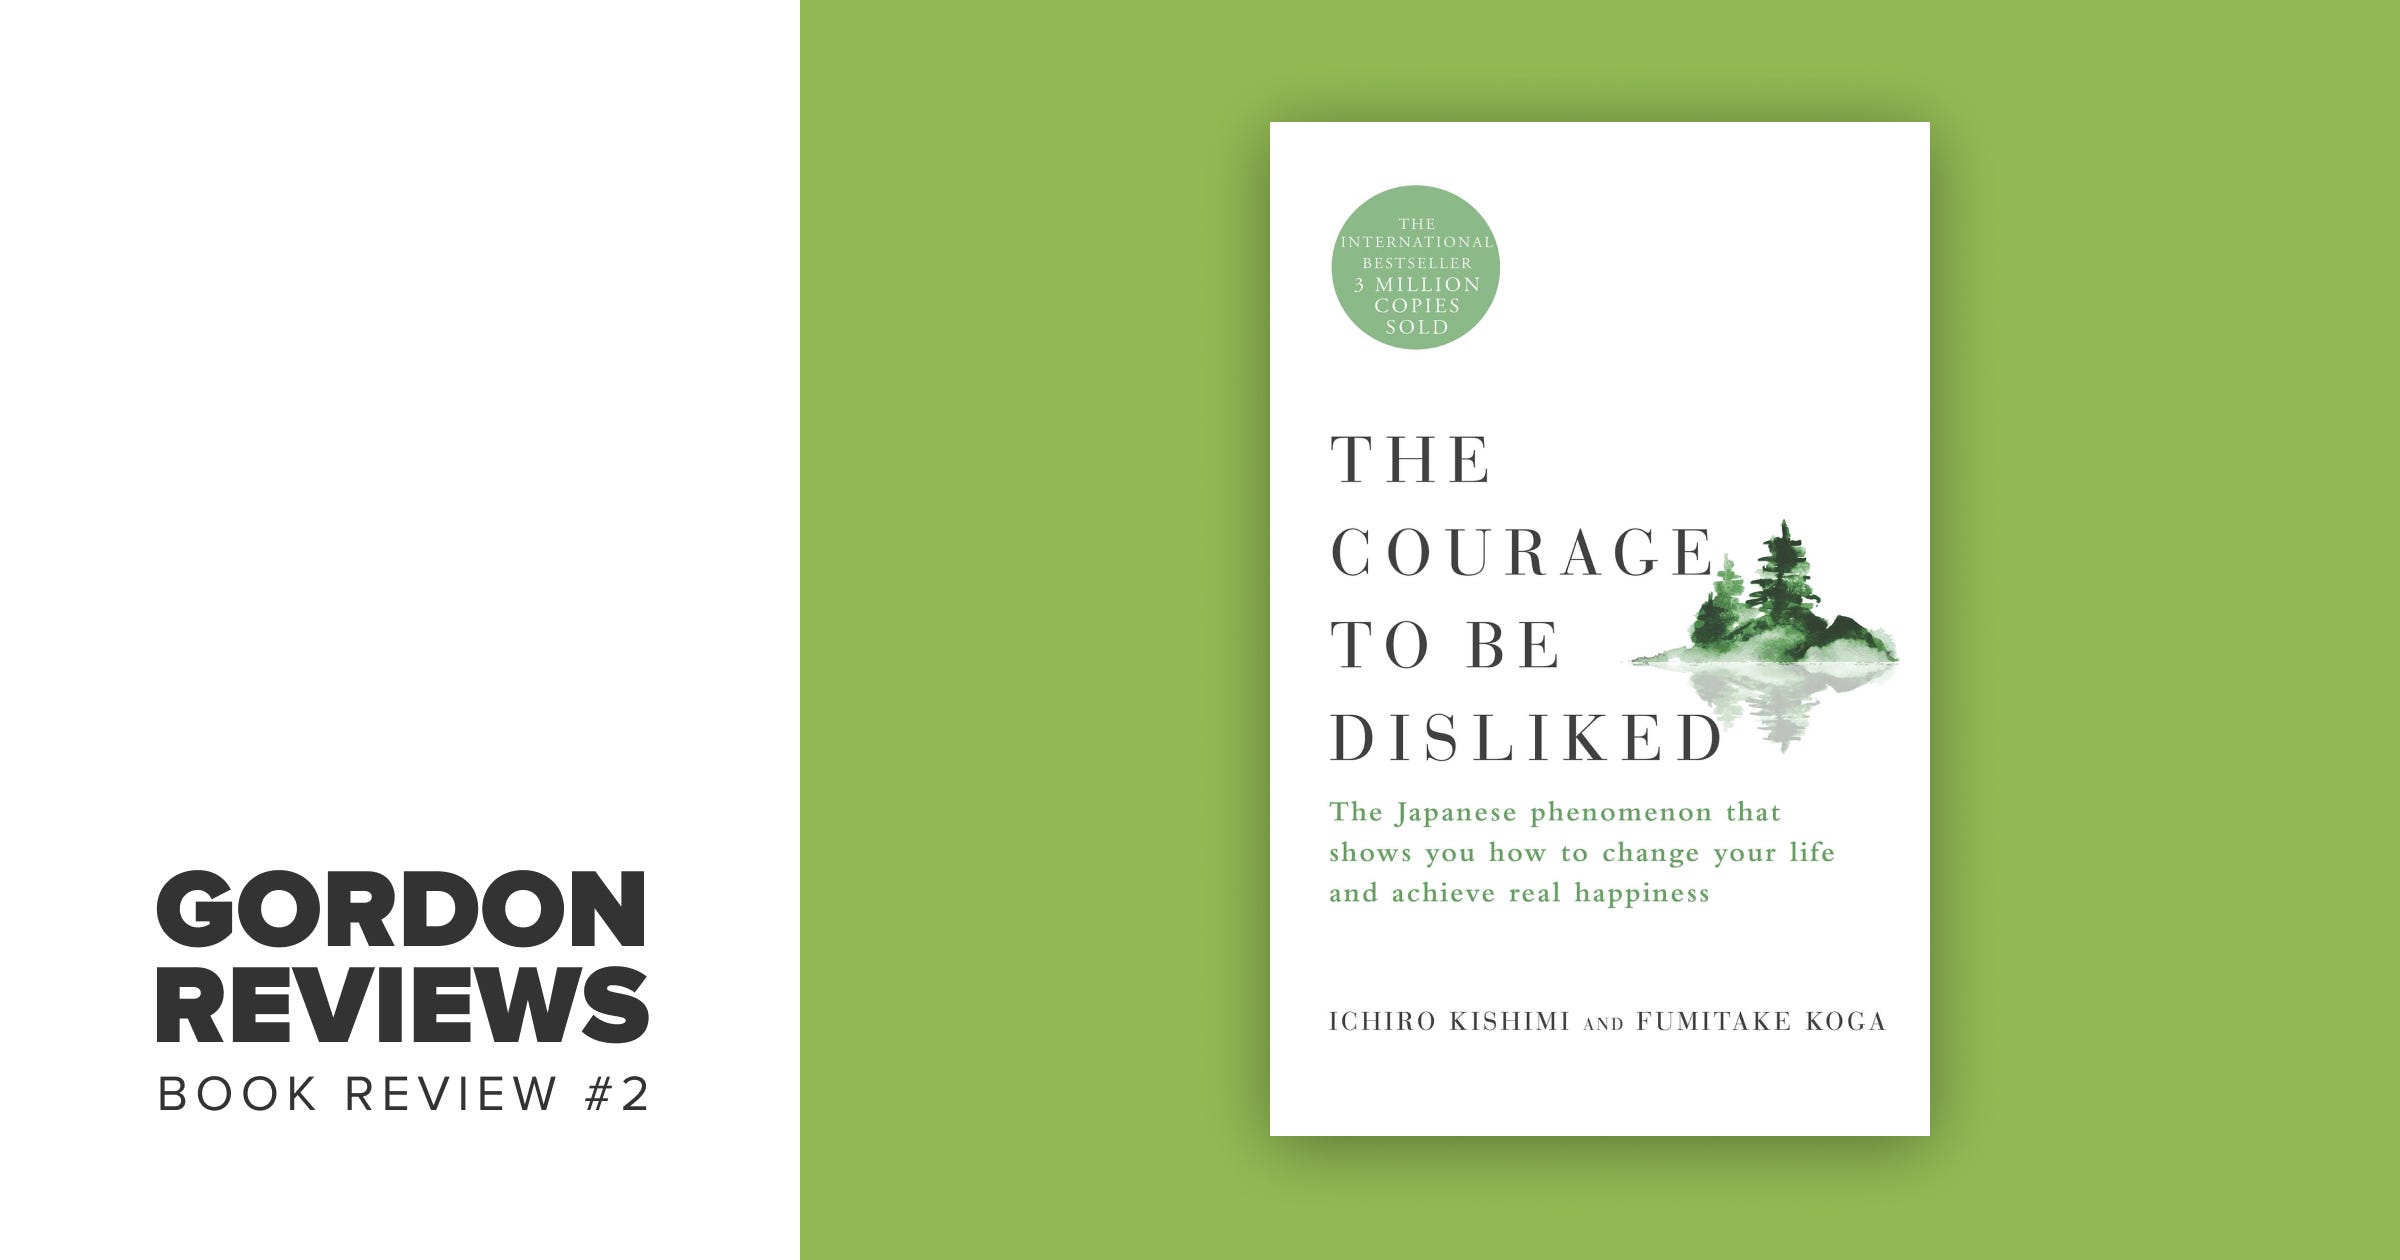 BOOK REVIEW #2 The Courage to be Disliked by Ichiro Kishimi ...